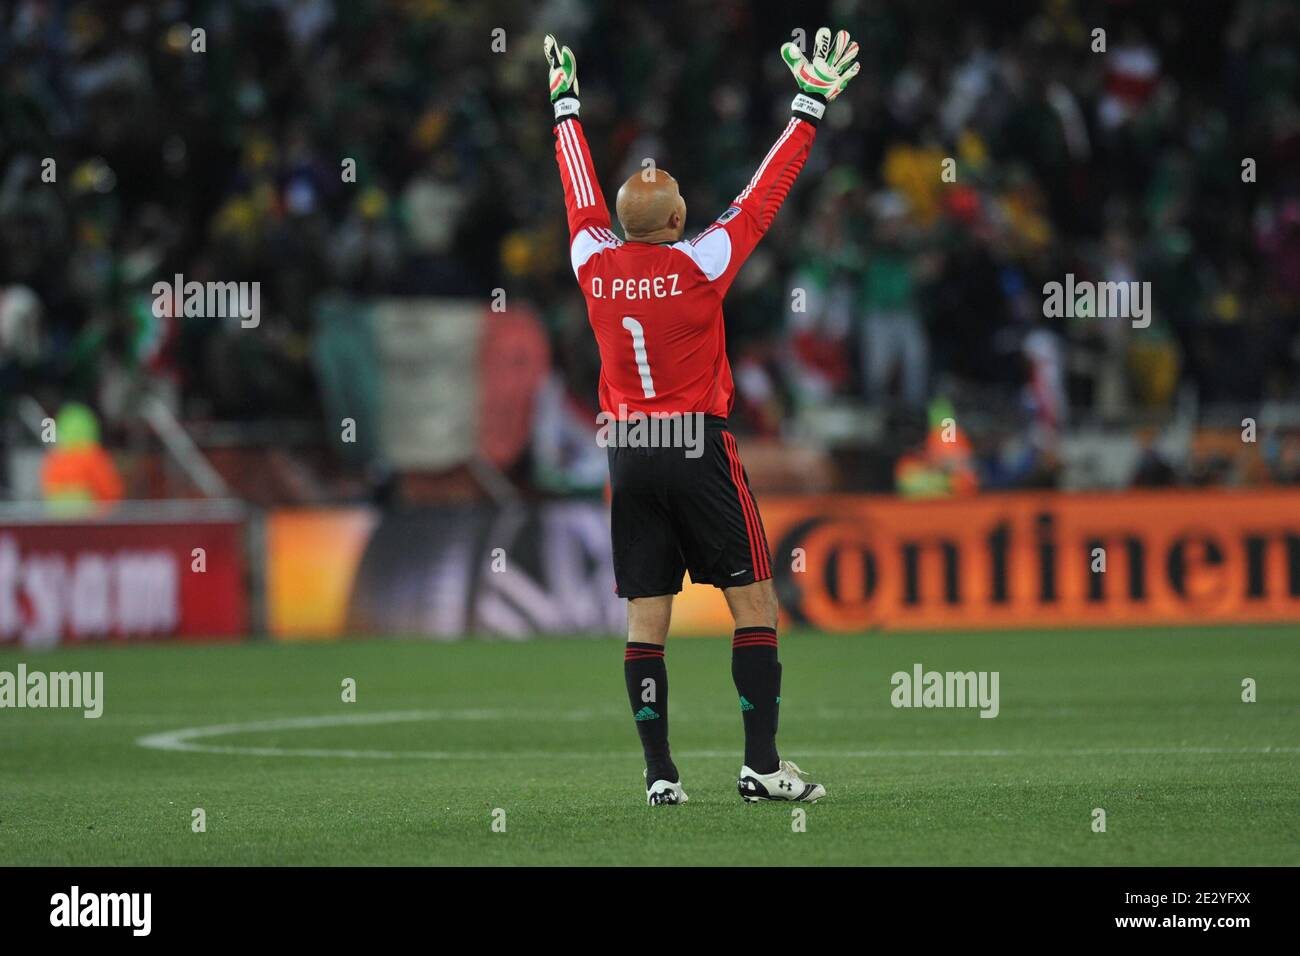 Mexico's goal keeper Oscar Perez celebrates after winning during the 2010 FIFA World Cup soccer match, Group A, France vs Mexico at Peter Mokaba Stadium, in Polokwane, South Africa on June 17, 2010. Mexico won 2-0. Photo by Christophe Guibbaud/Cameleon/ABACAPRESS.COM Stock Photo